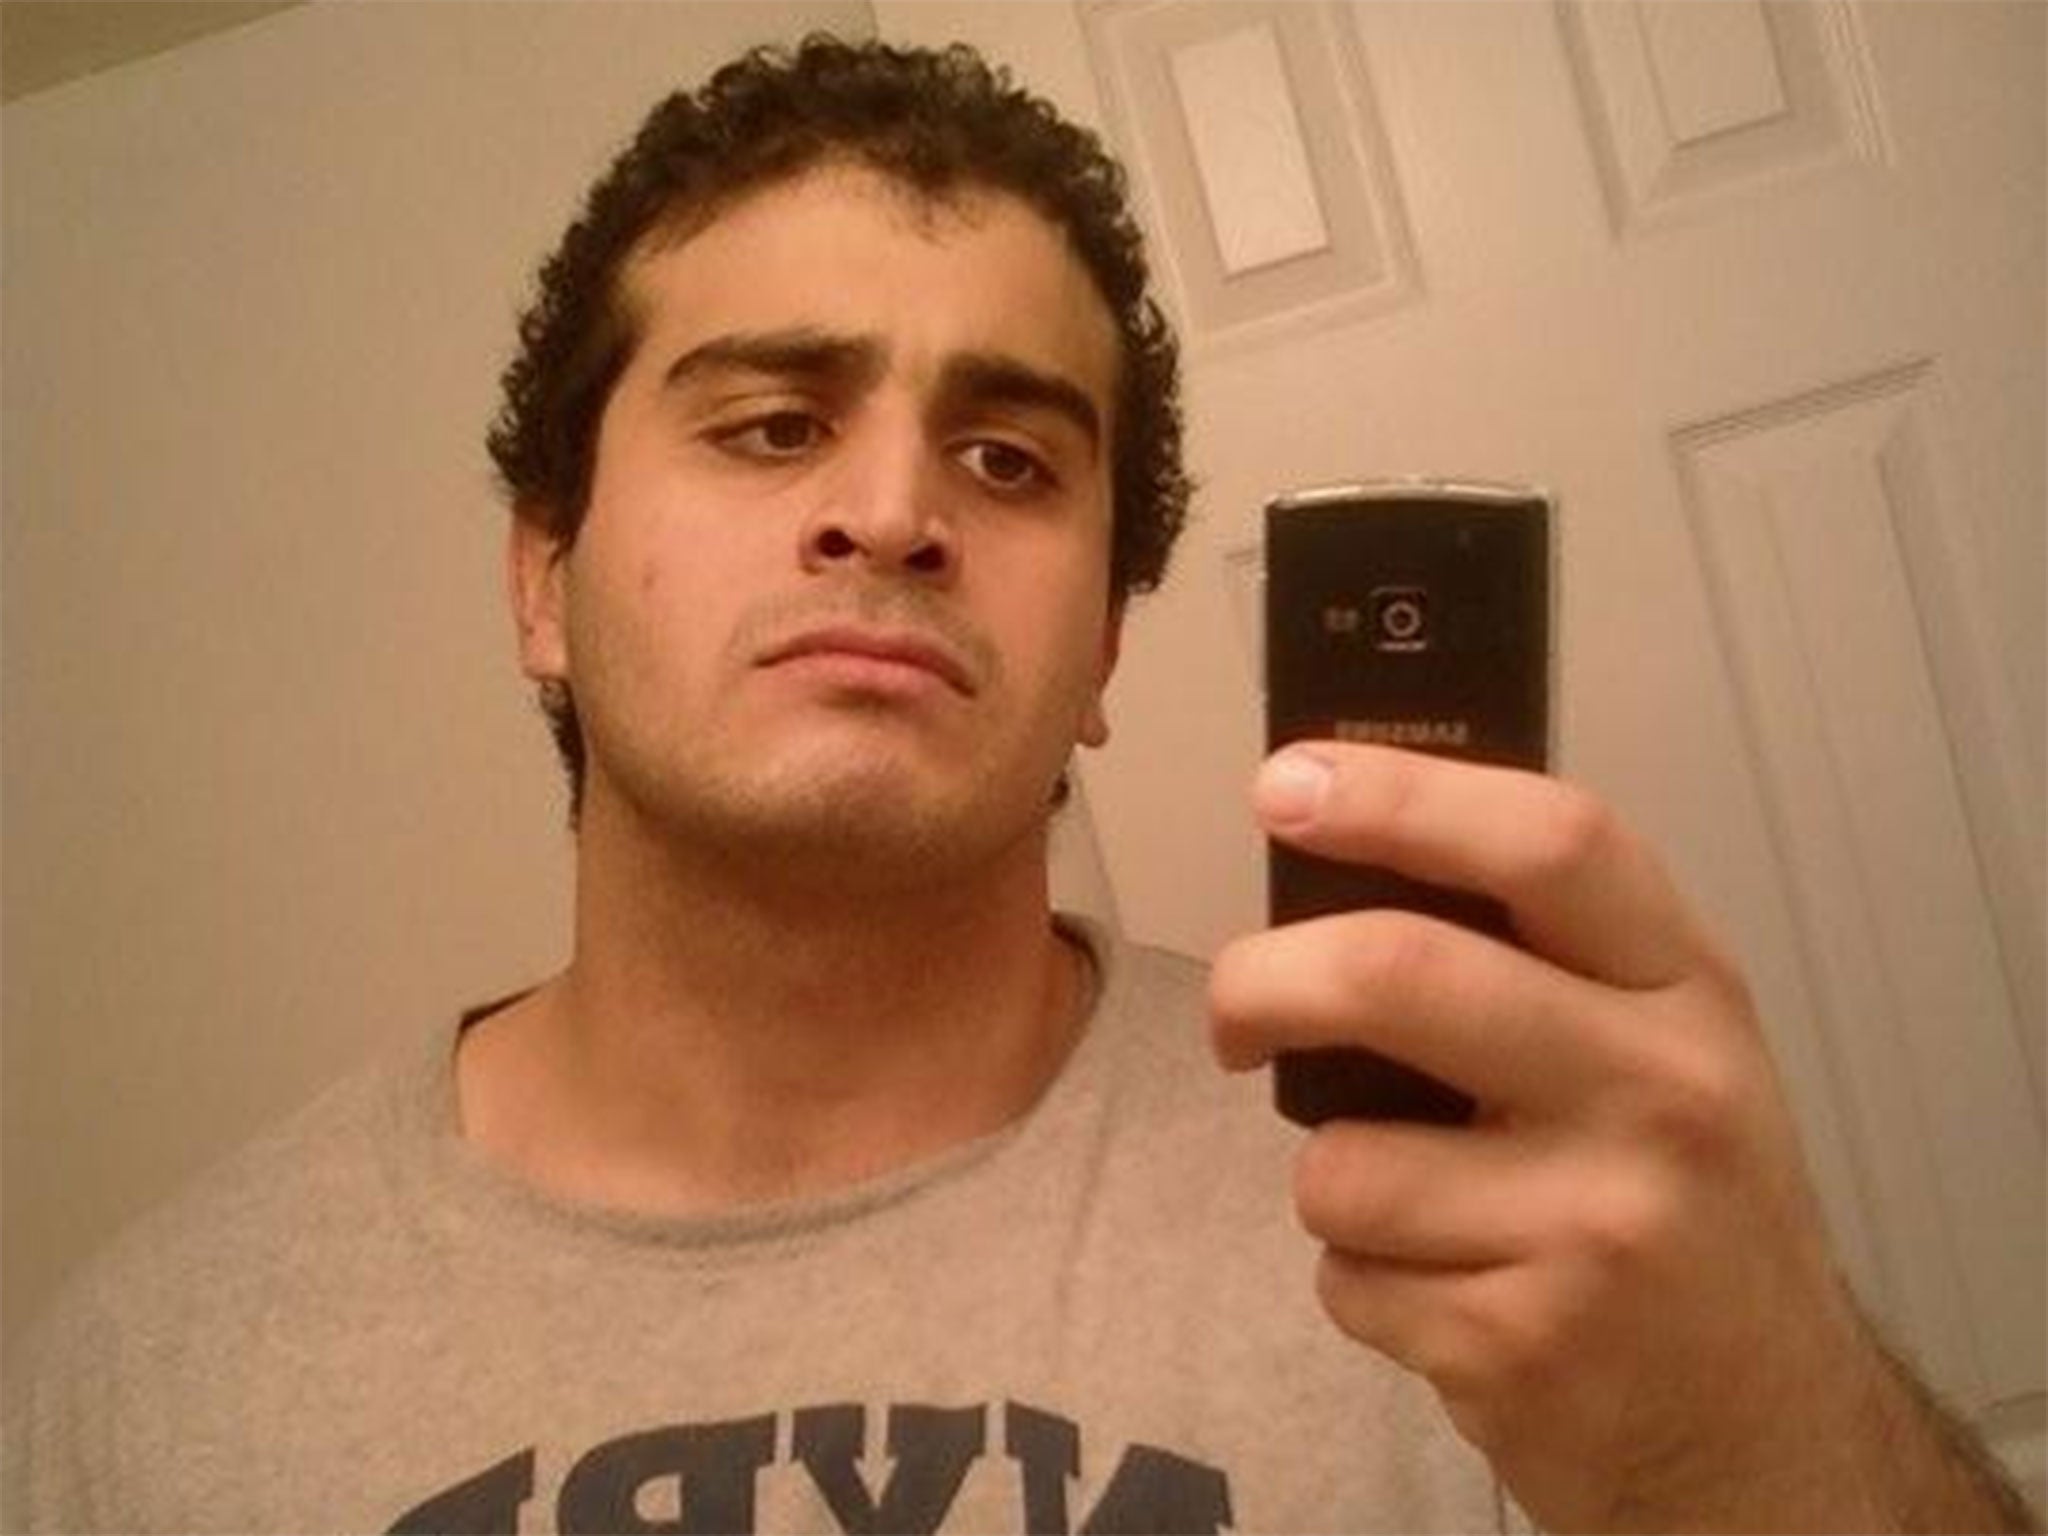 The son of Afghan immigrants, Omar Mateen was born in New York and grew up in Florida